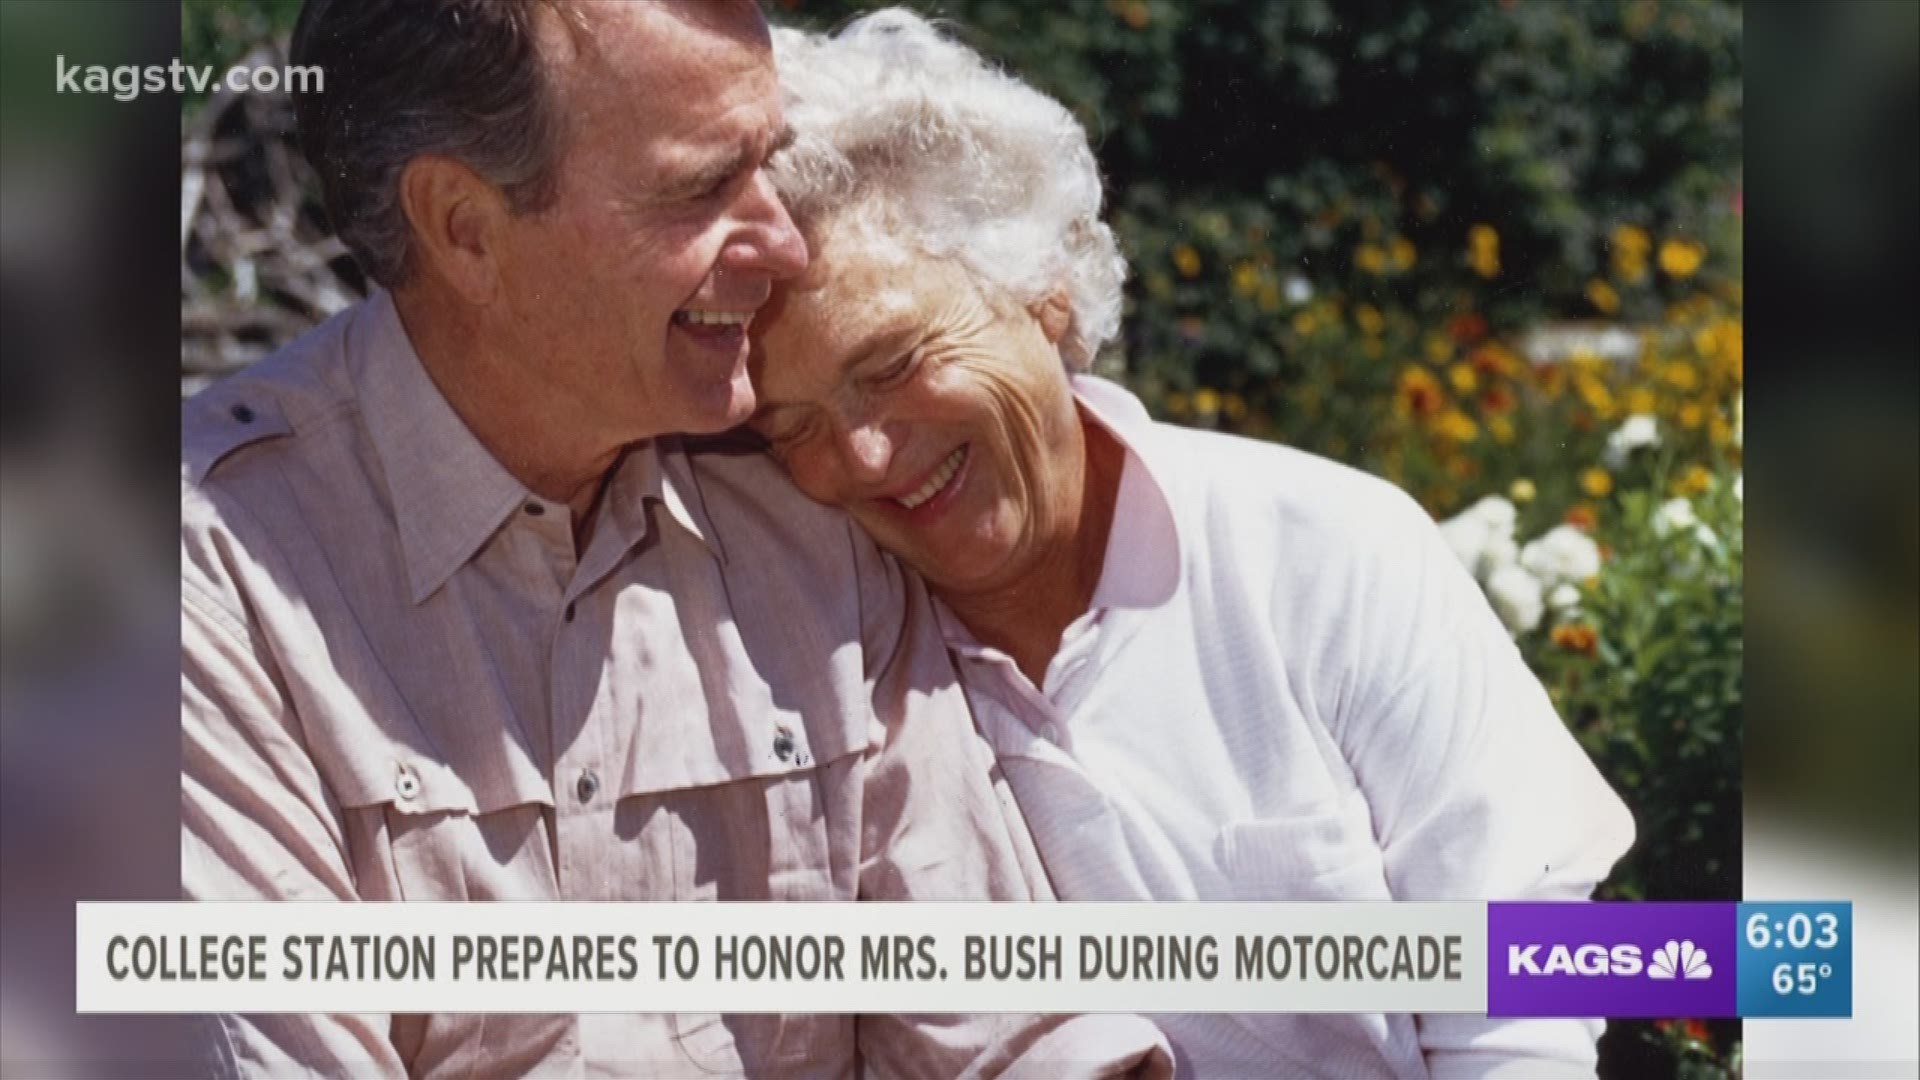 The motorcade honoring Barbara Bush will come into College Station on Saturday afternoon.